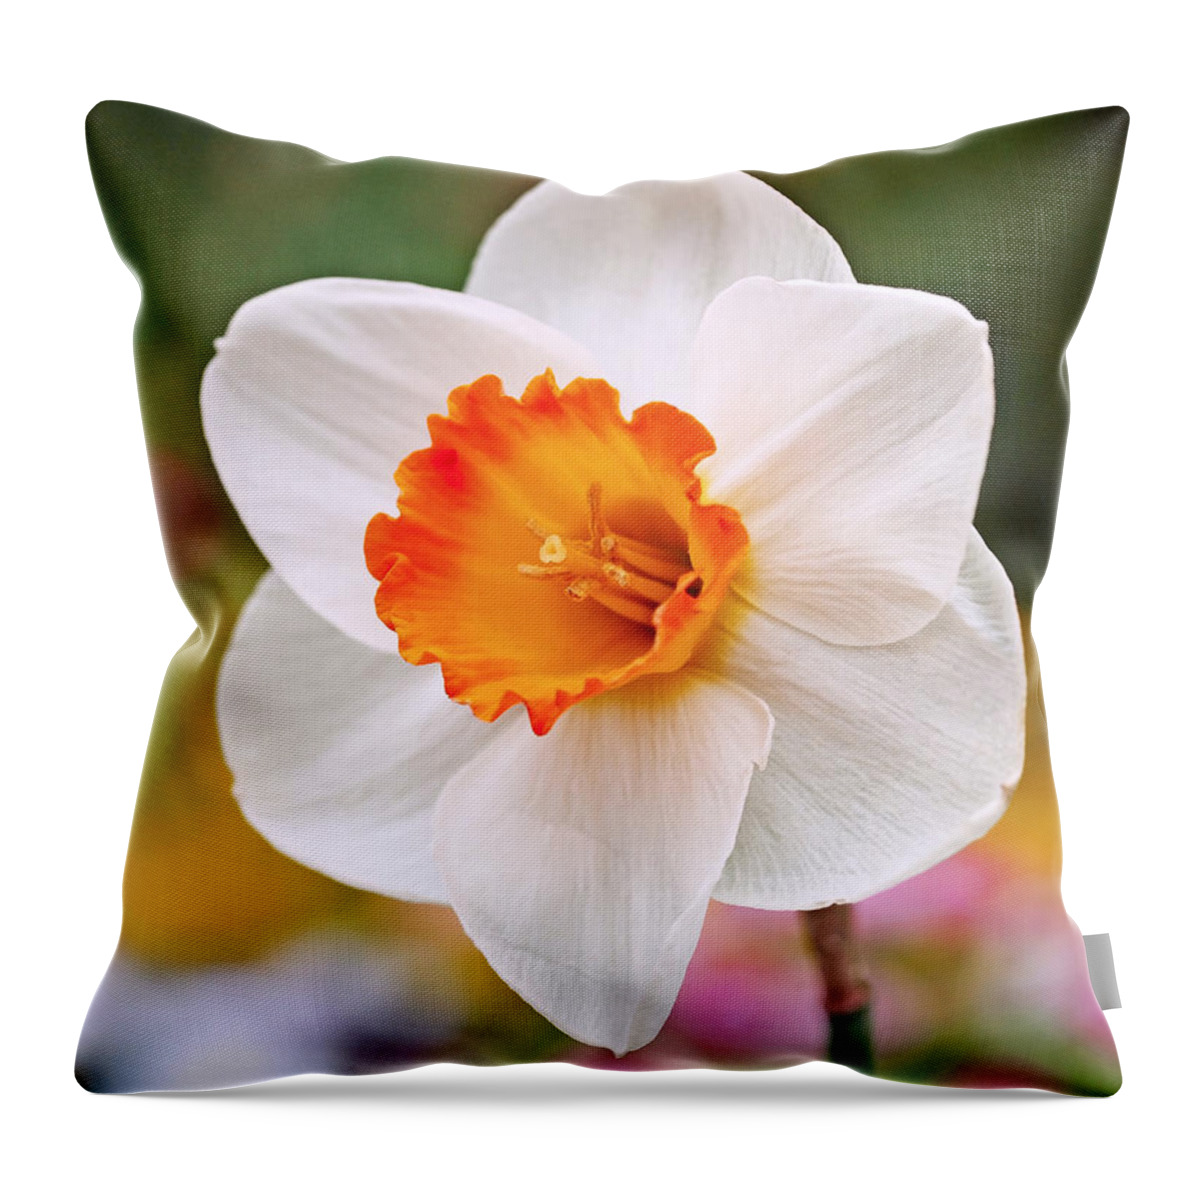 Daffodil Throw Pillow featuring the photograph Daffodil by Rona Black